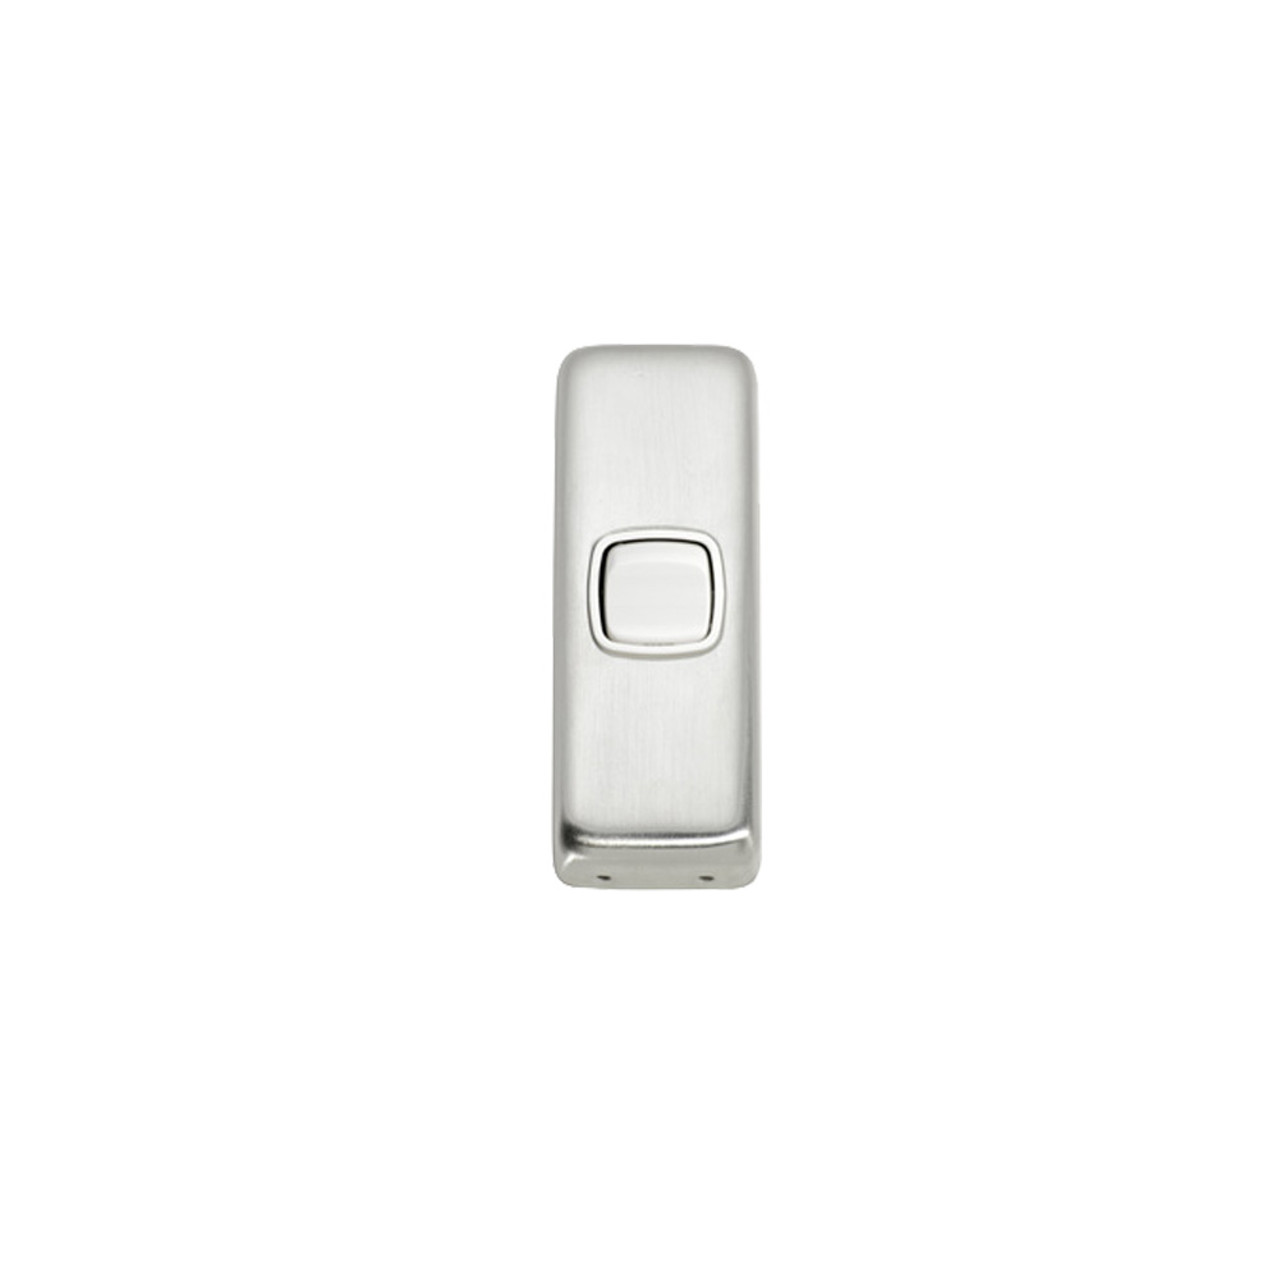 1 Gang Flat Plate Heritage Architrave Light Switches - Satin Chrome Plate with White Rocker